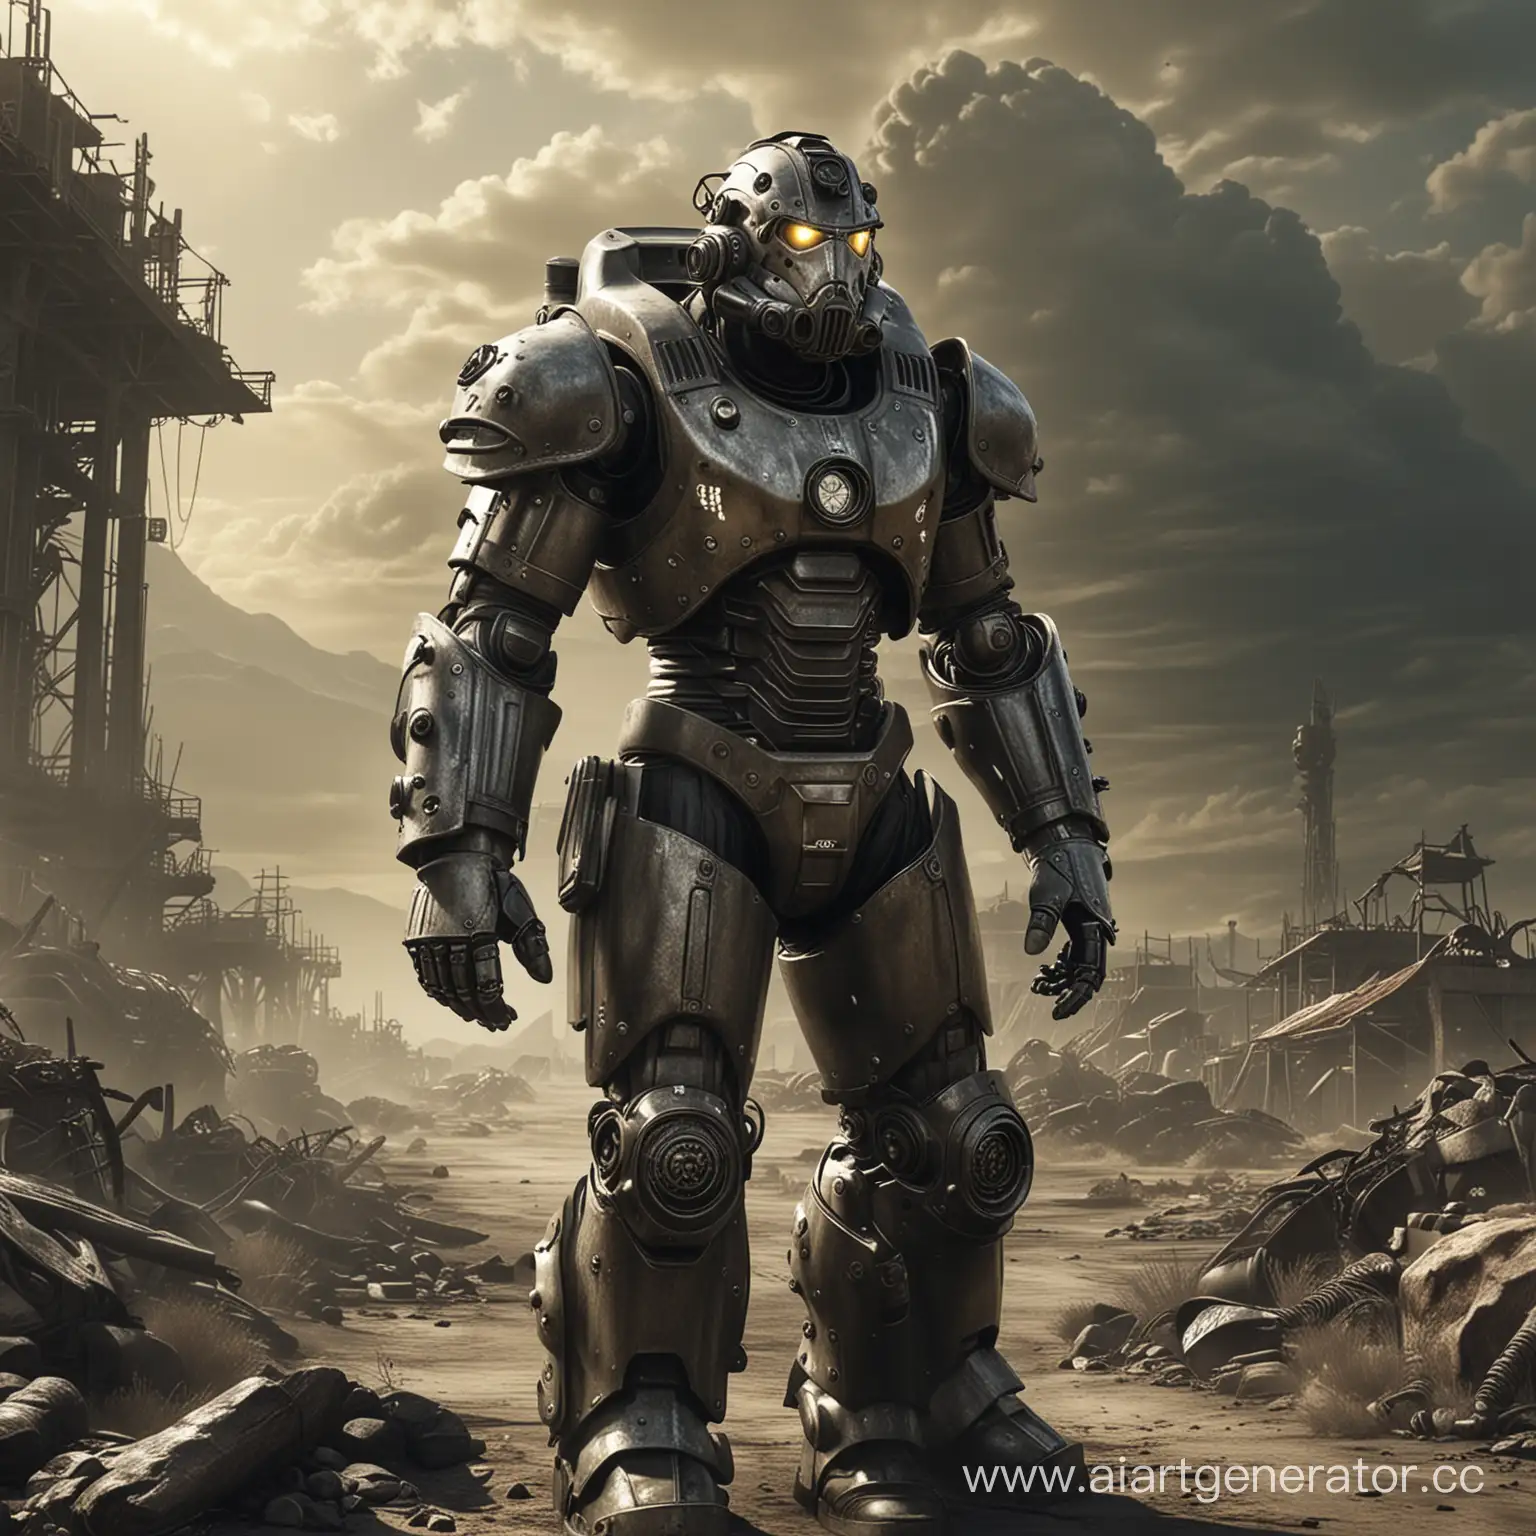 Fallout-Power-Armor-Futuristic-Soldier-in-PostApocalyptic-Landscape